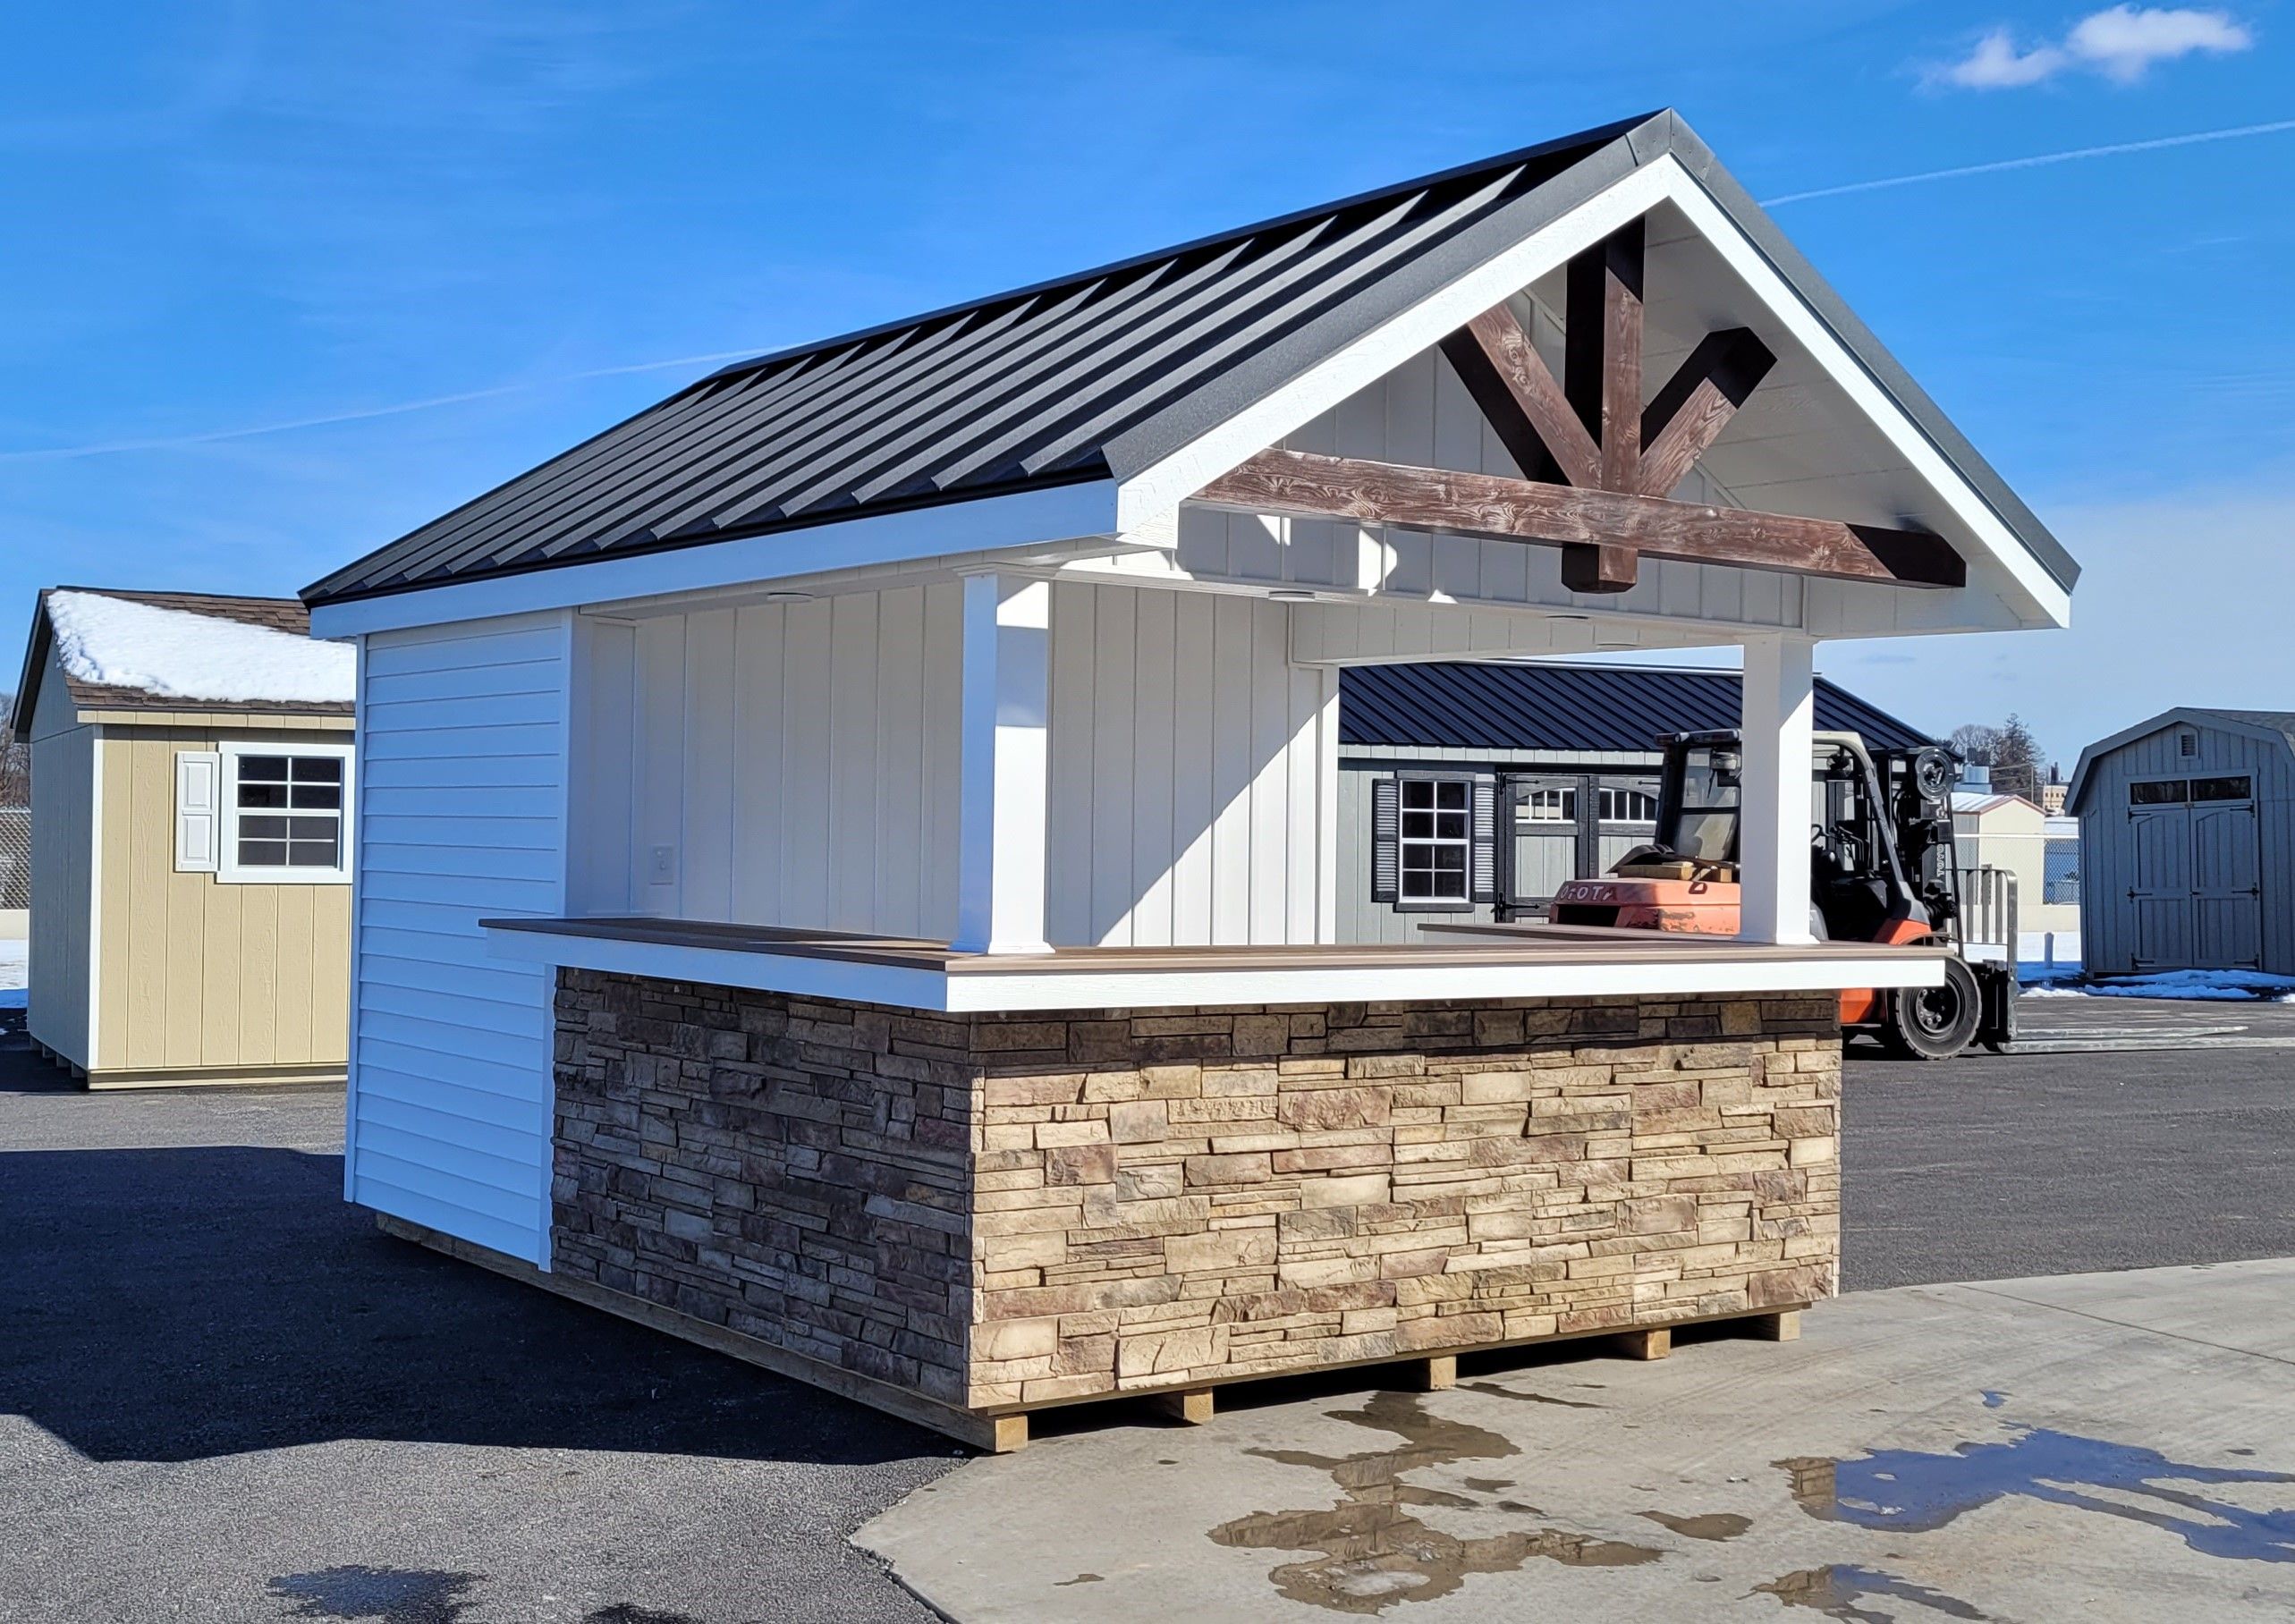 Pool Houses for Pond View Mini Structures in  Strasburg, PA